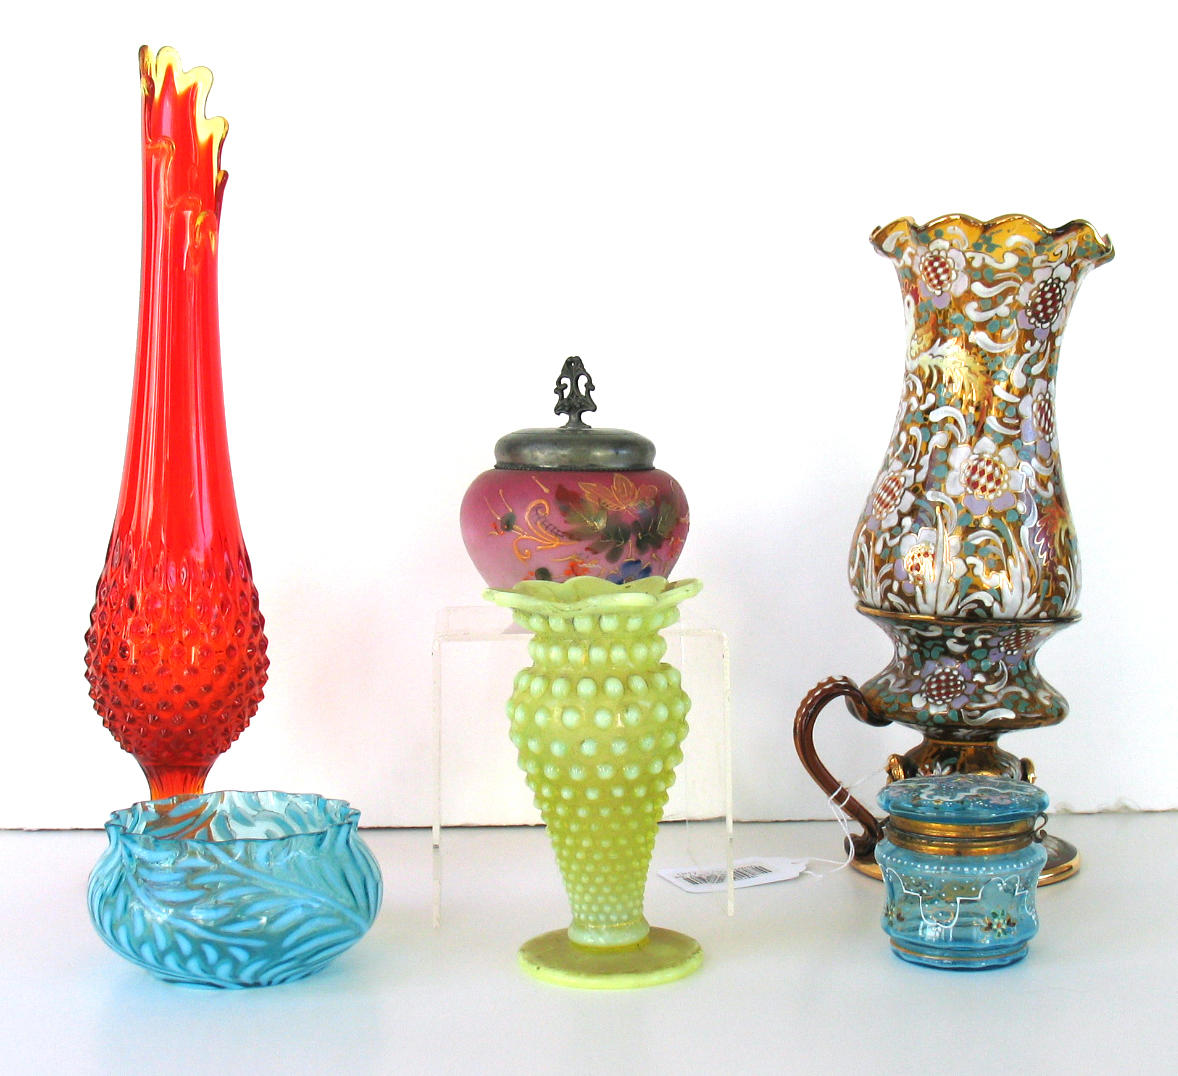 A large assembled grouping of glassware